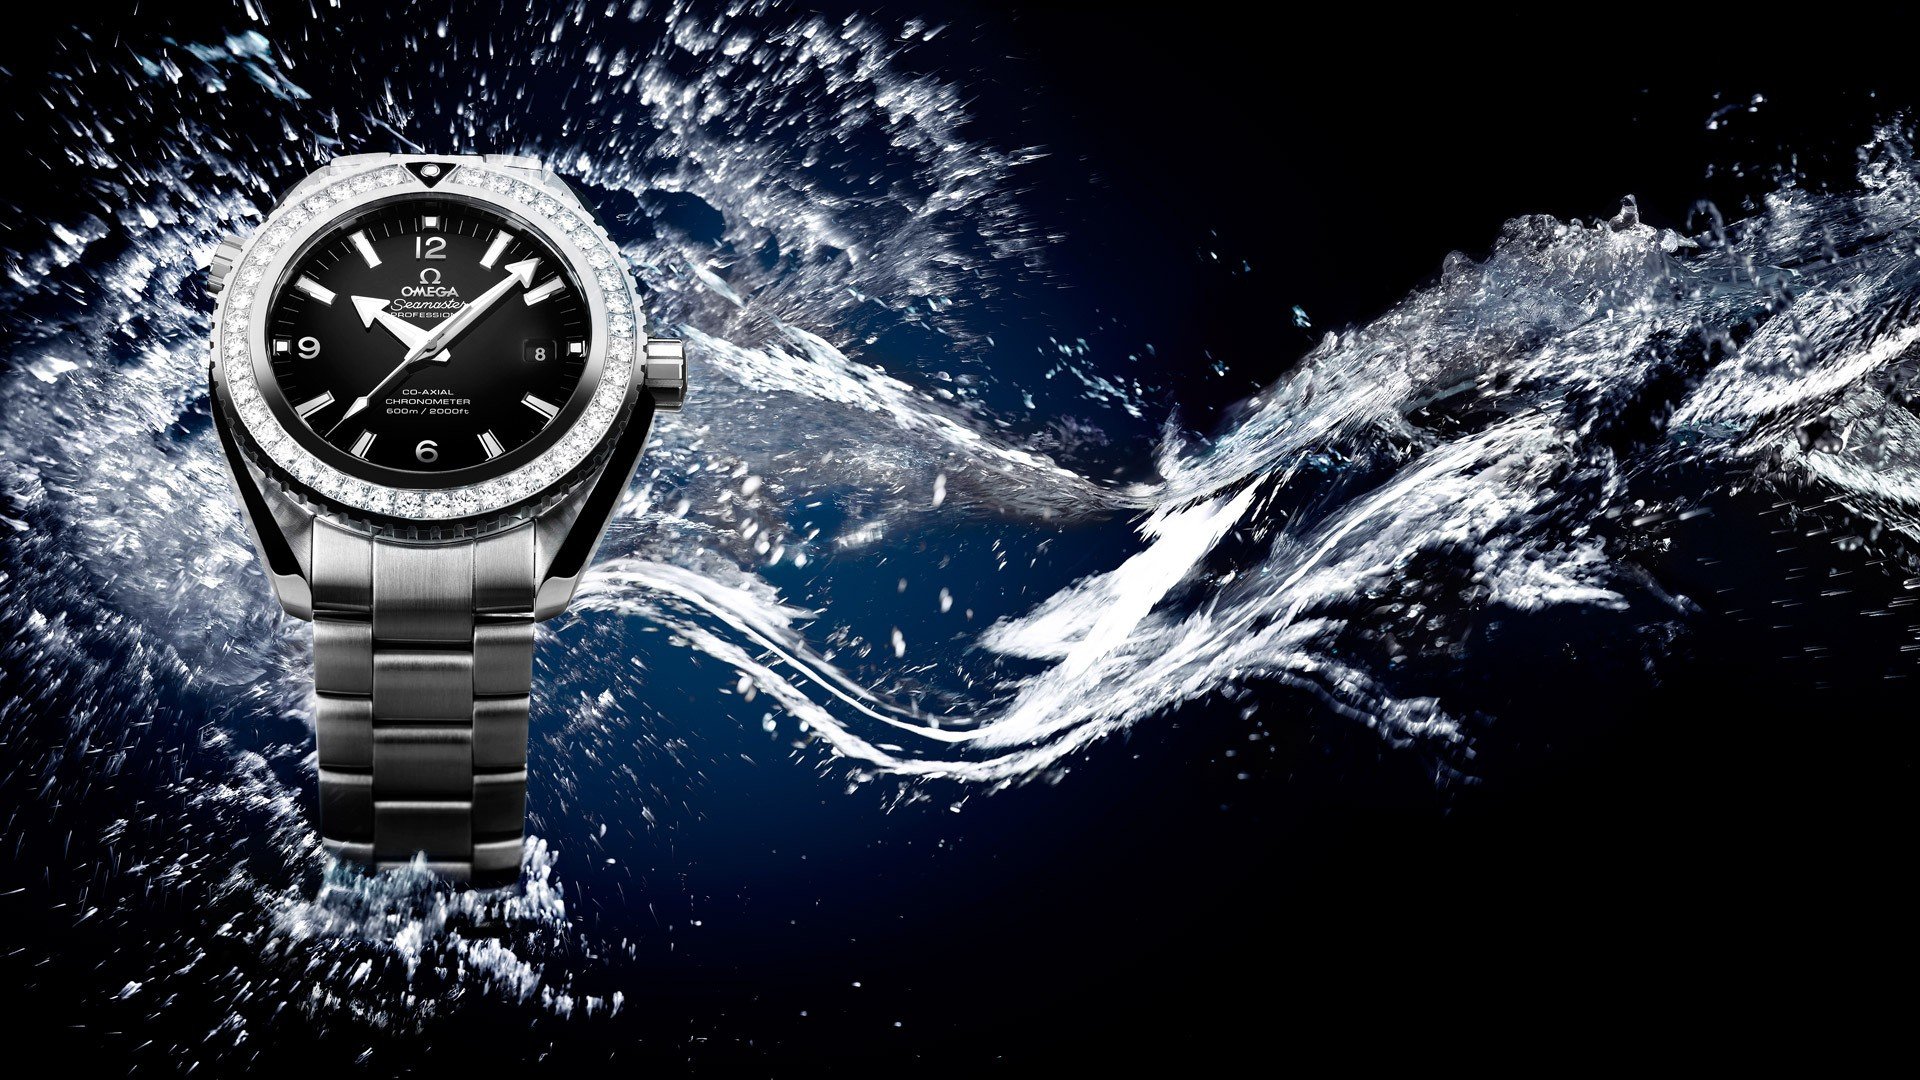 Seamaster Omega Watch Wallpapers Hd Desktop And Mobile Backgrounds